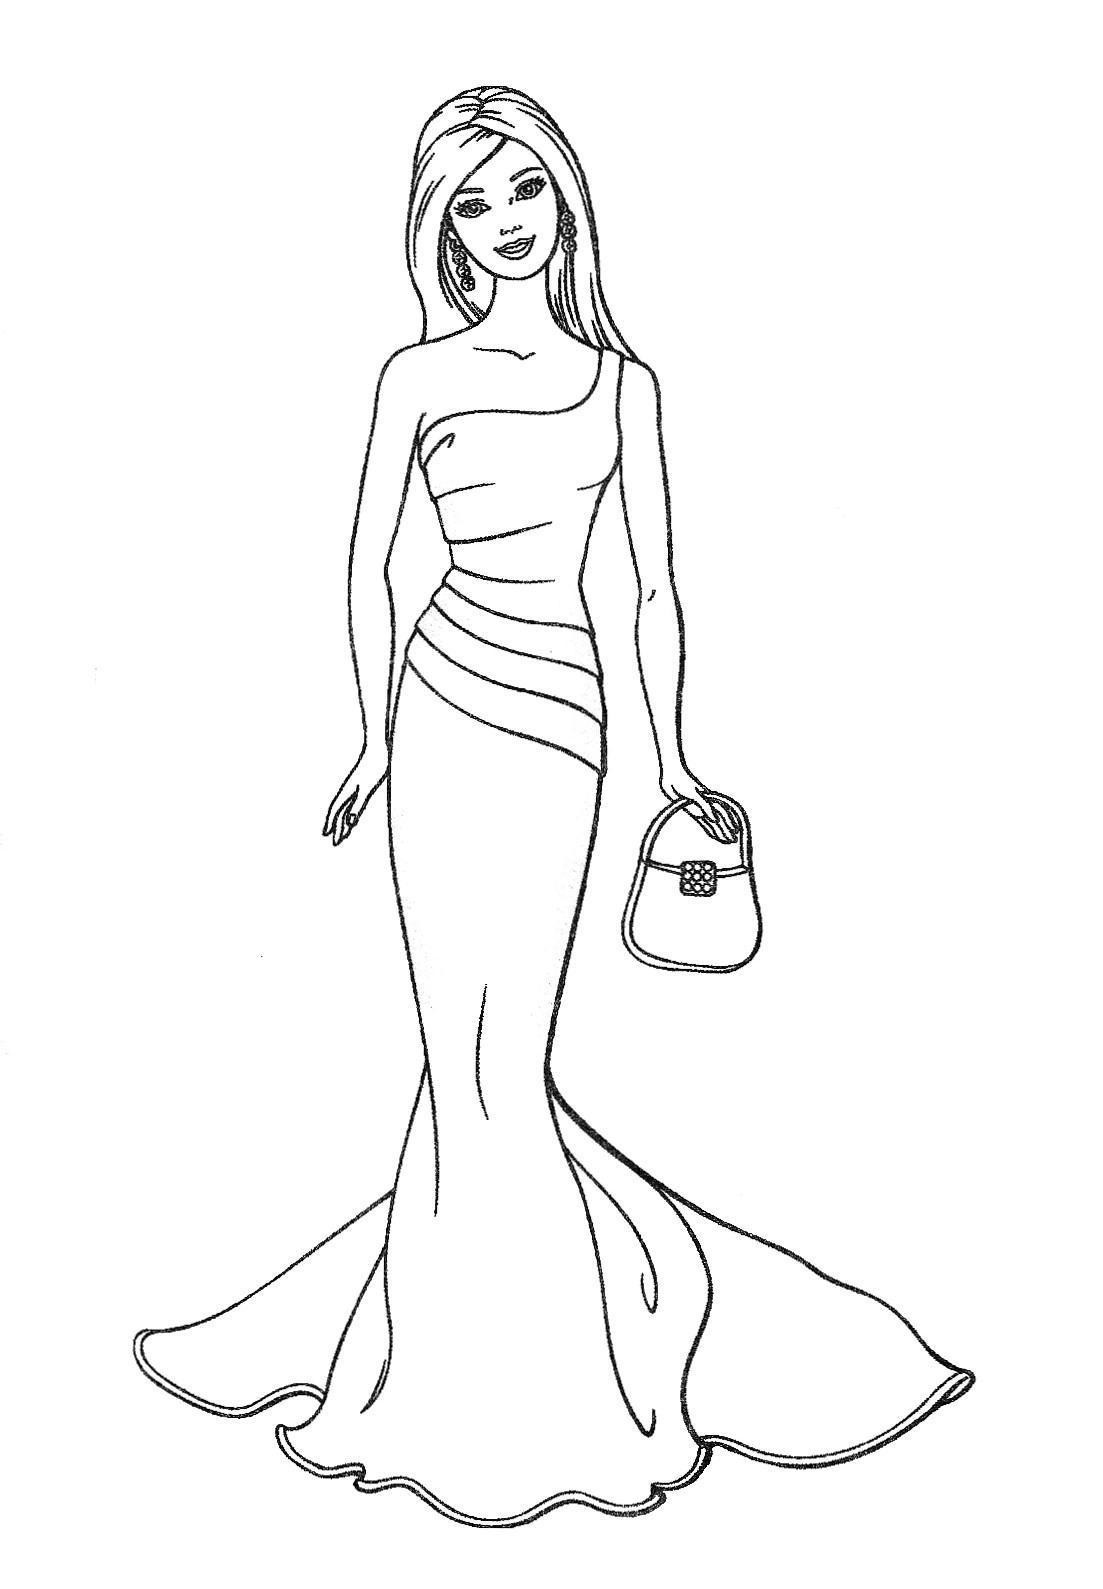 Coloring Pages For Kids Barbie
 Barbie to color for children Barbie Kids Coloring Pages